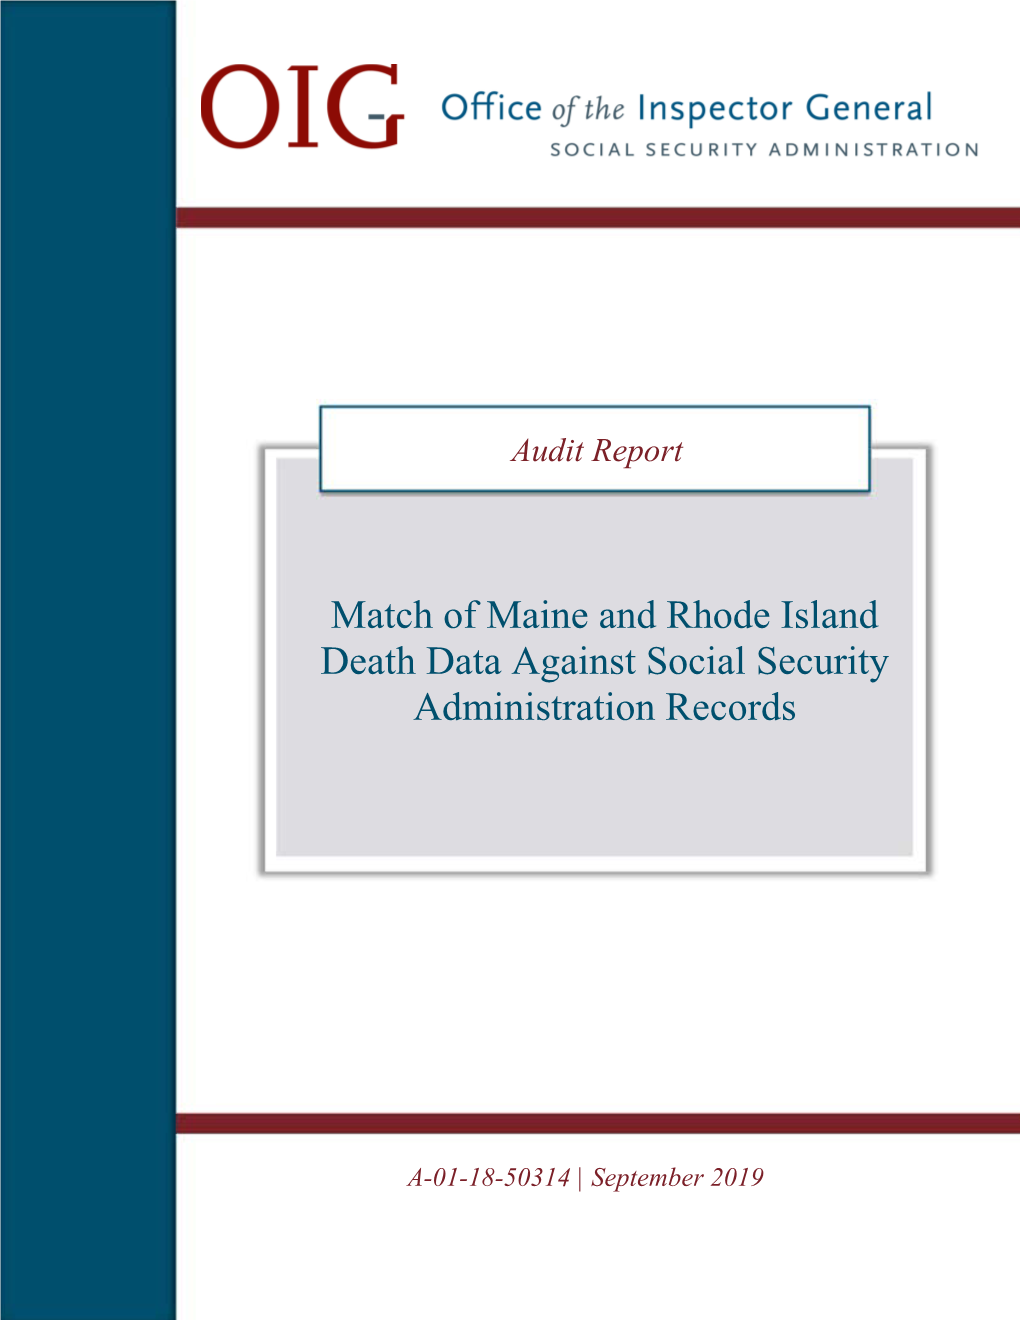 Match of Maine and Rhode Island Death Data Against Social Security Administration Records